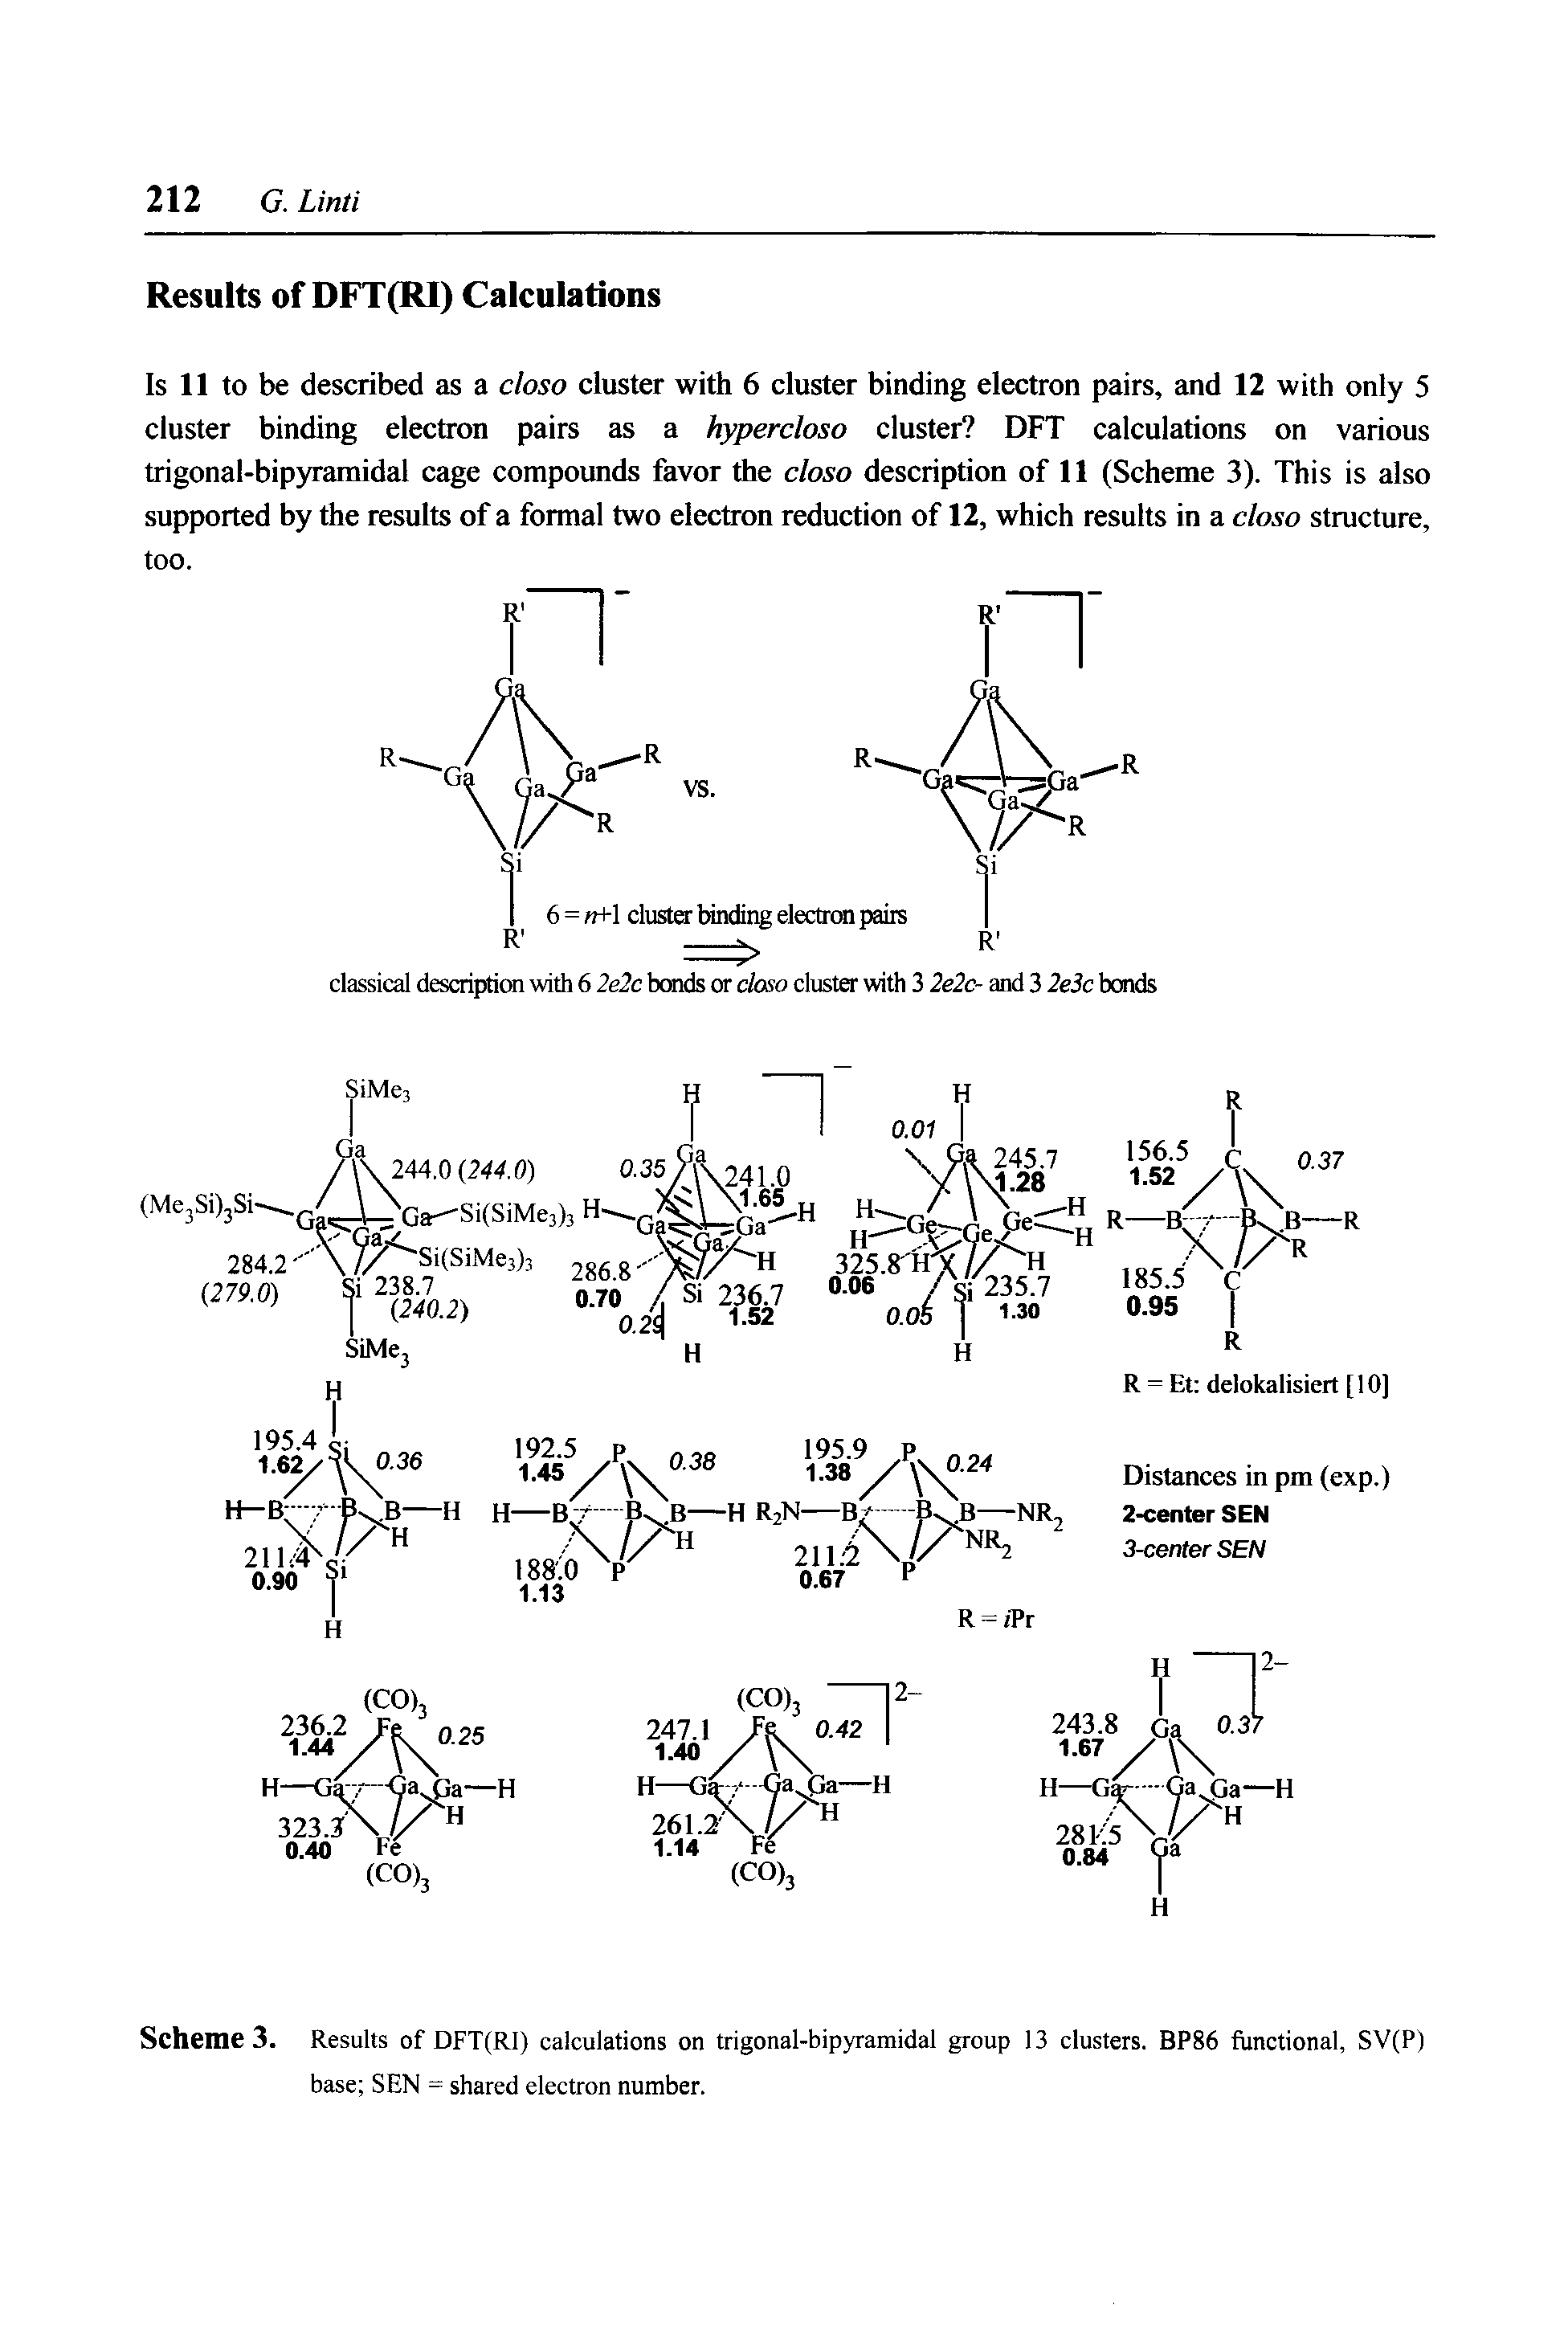 Scheme 3. Results of DFT(RI) calculations on trigonal-bipyramidal group 13 clusters. BP86 functional, SV(P) base SEN = shared electron number.